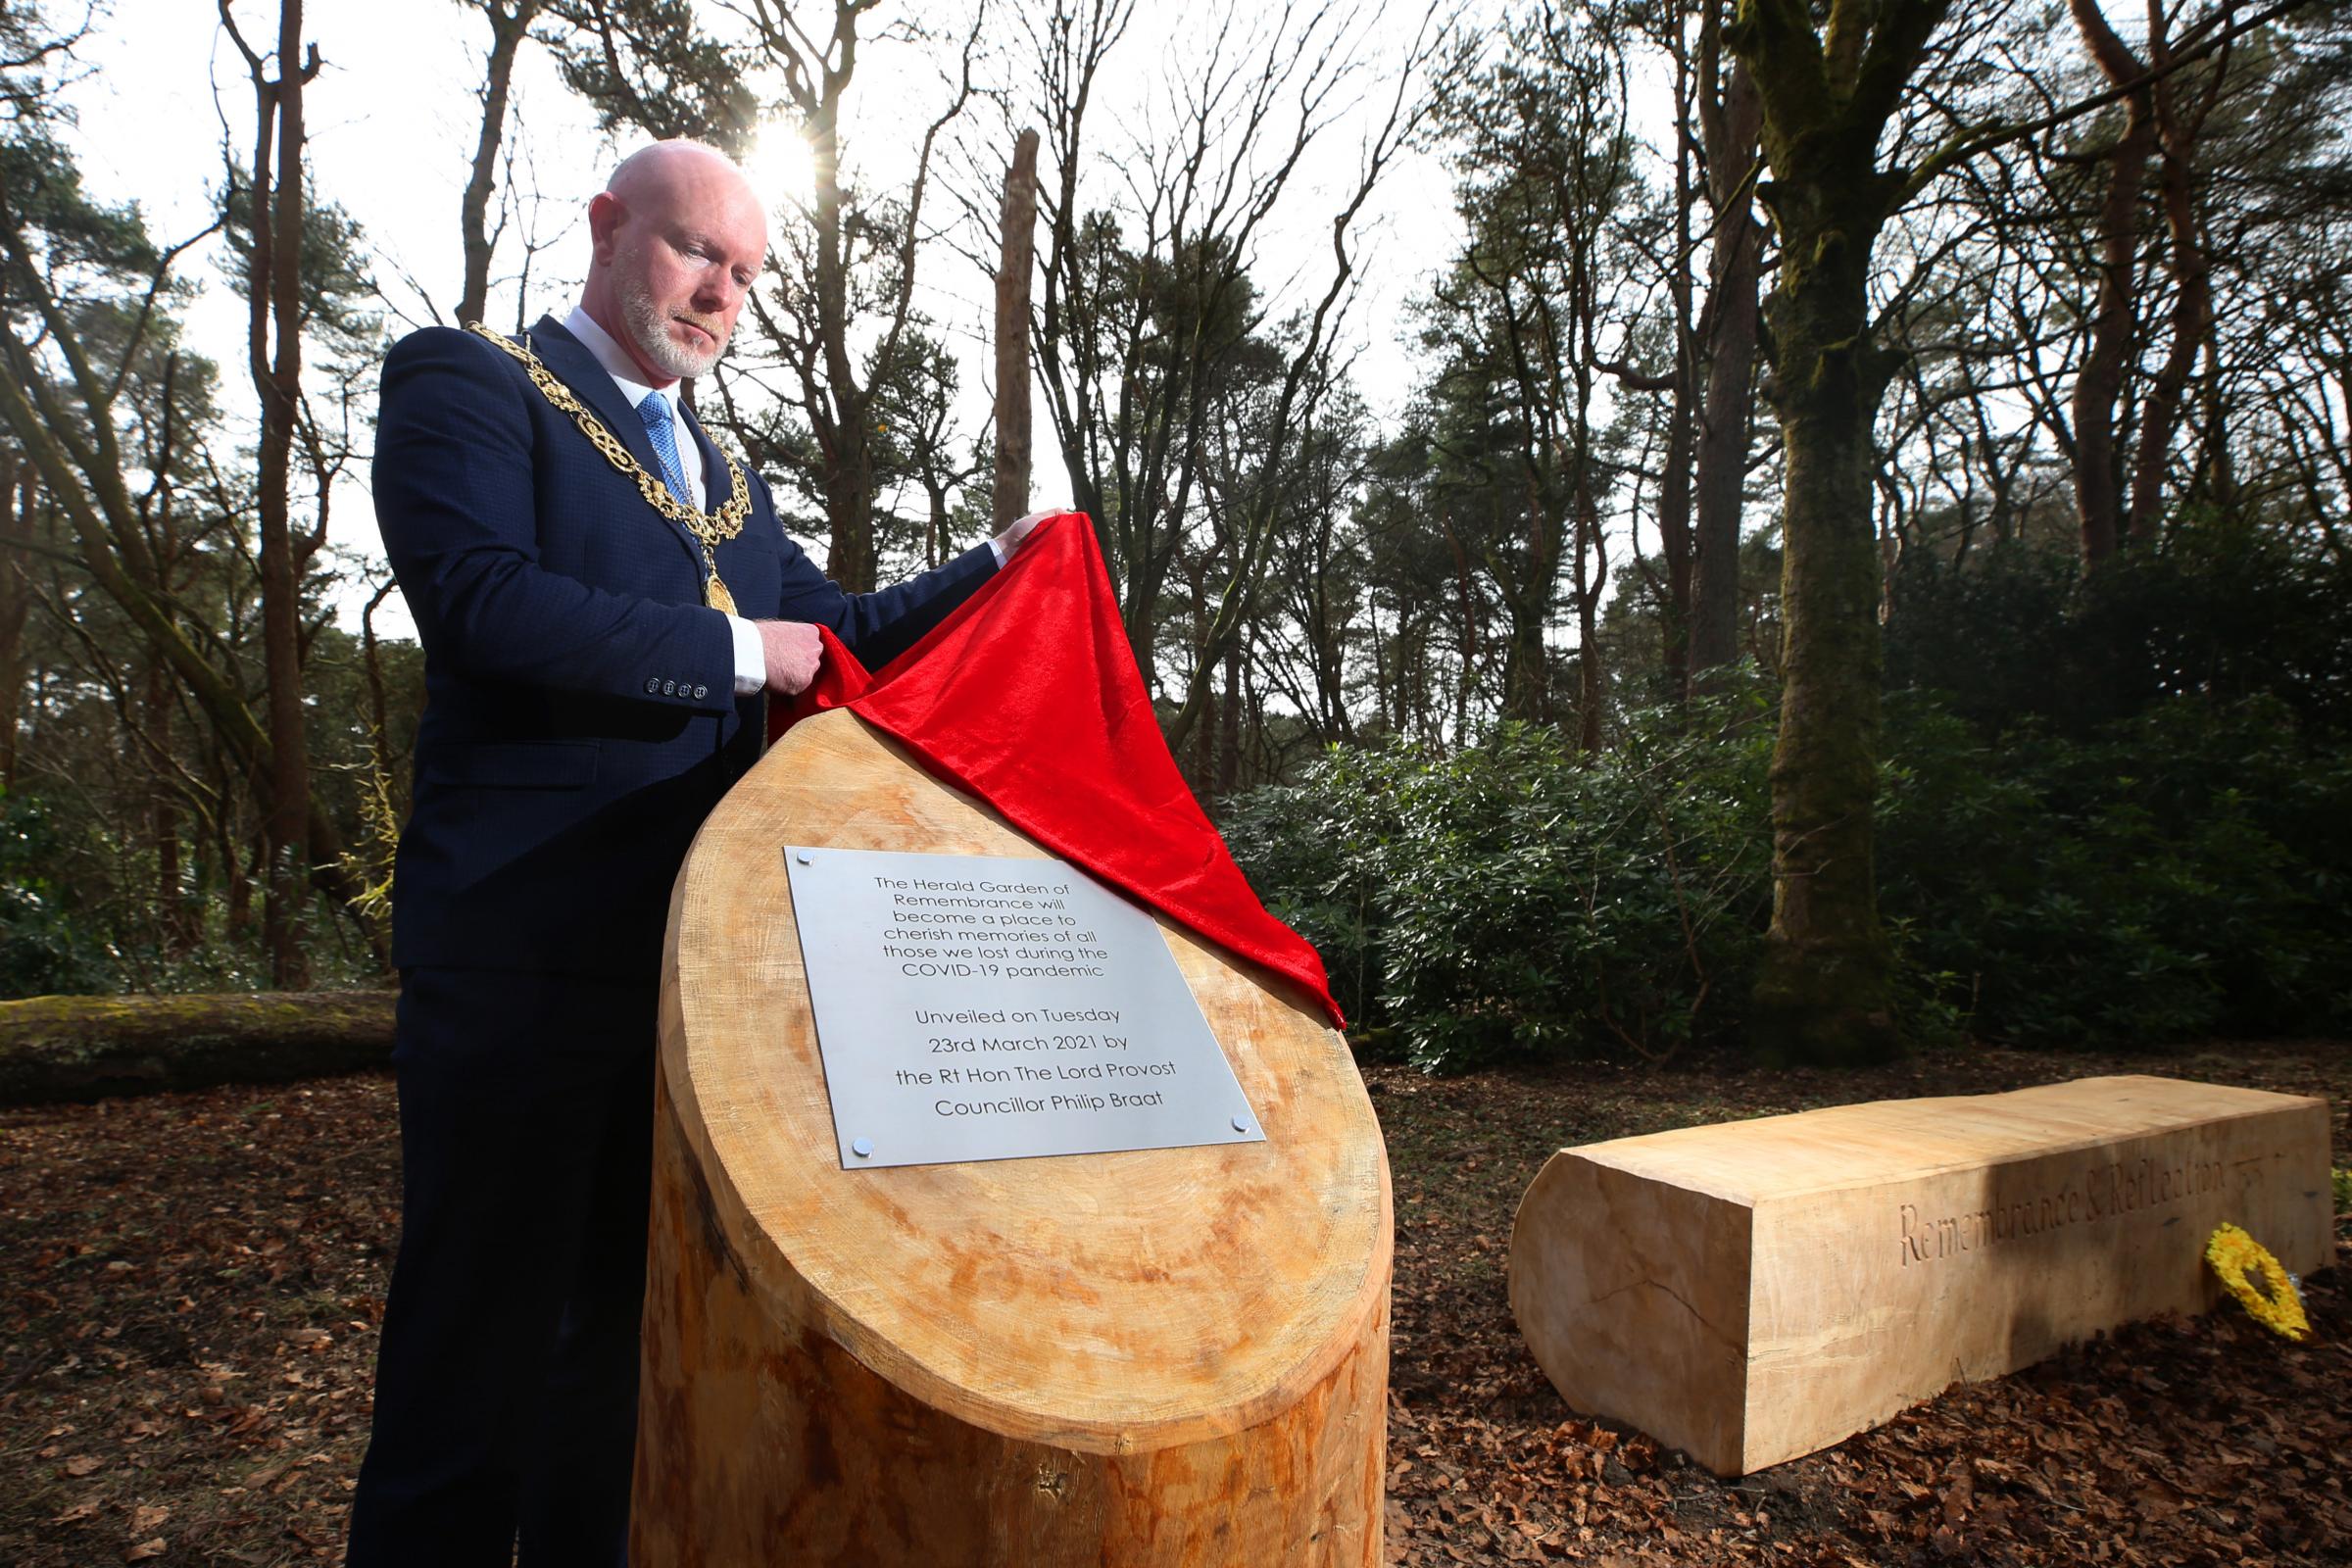 Lord Provost of Glasgow Philip Braat in Pollok Country Park. Photo by Gordon Terris.